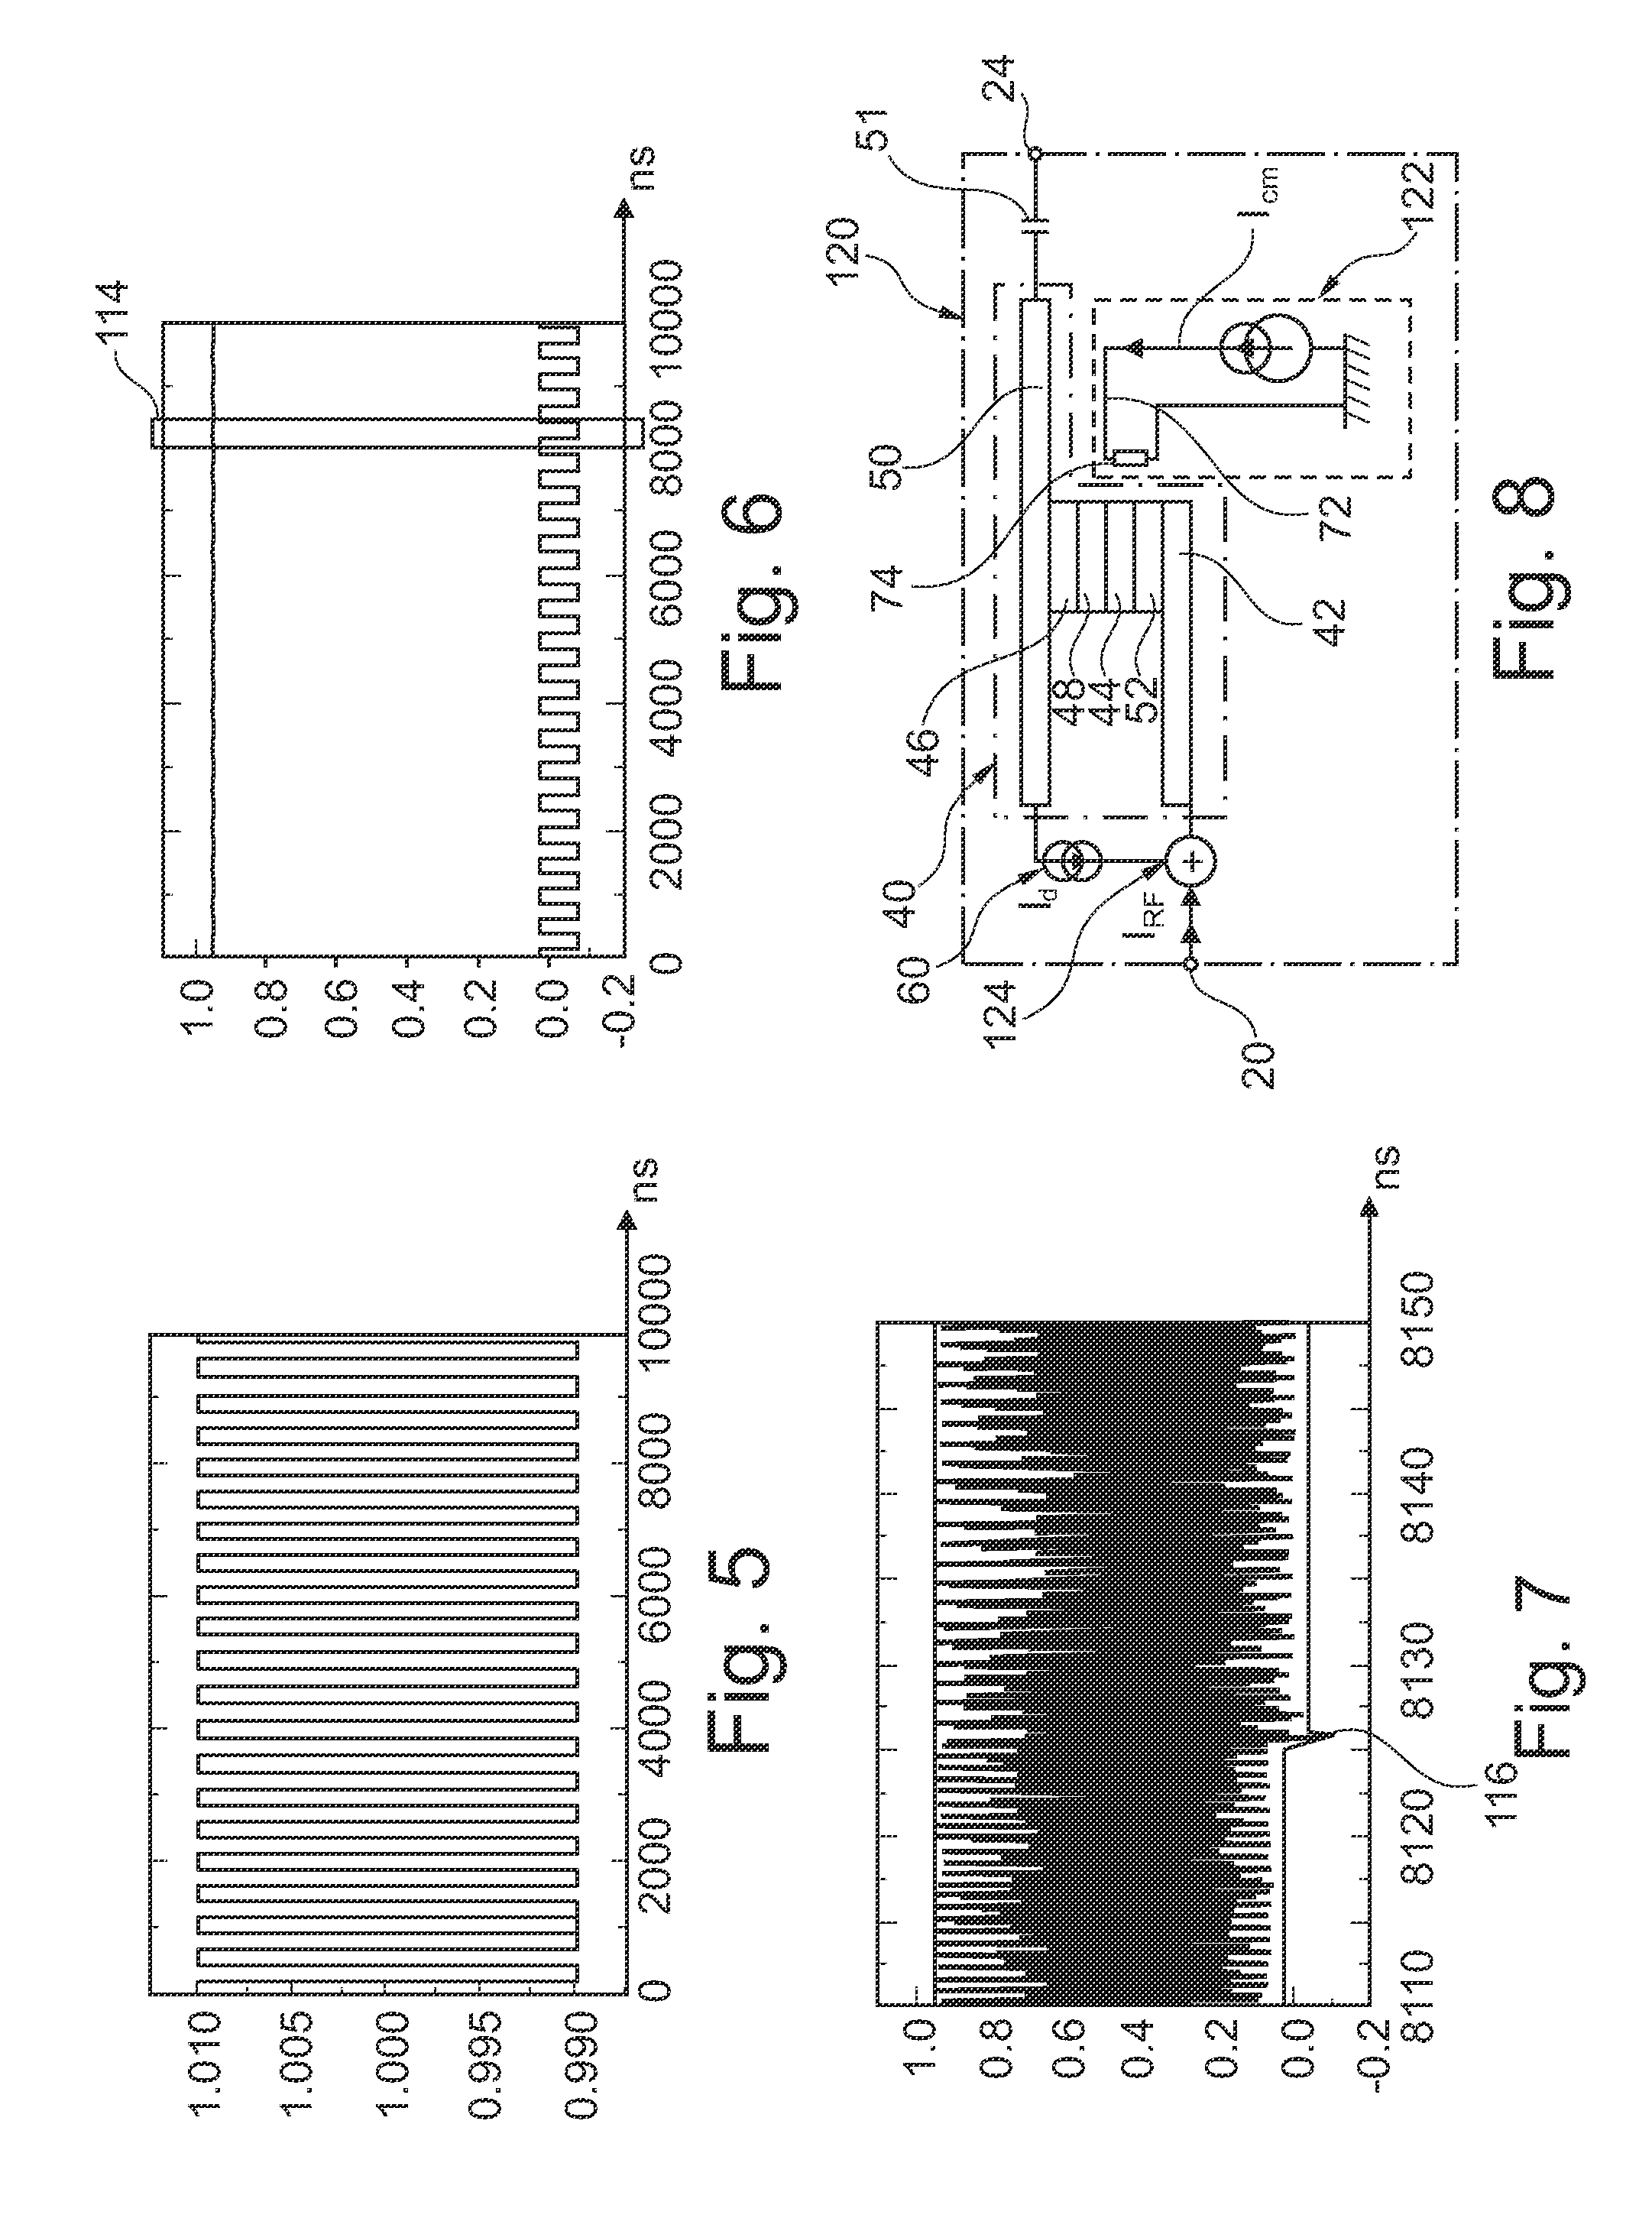 Demodulator of a frequency-modulated electrical signal